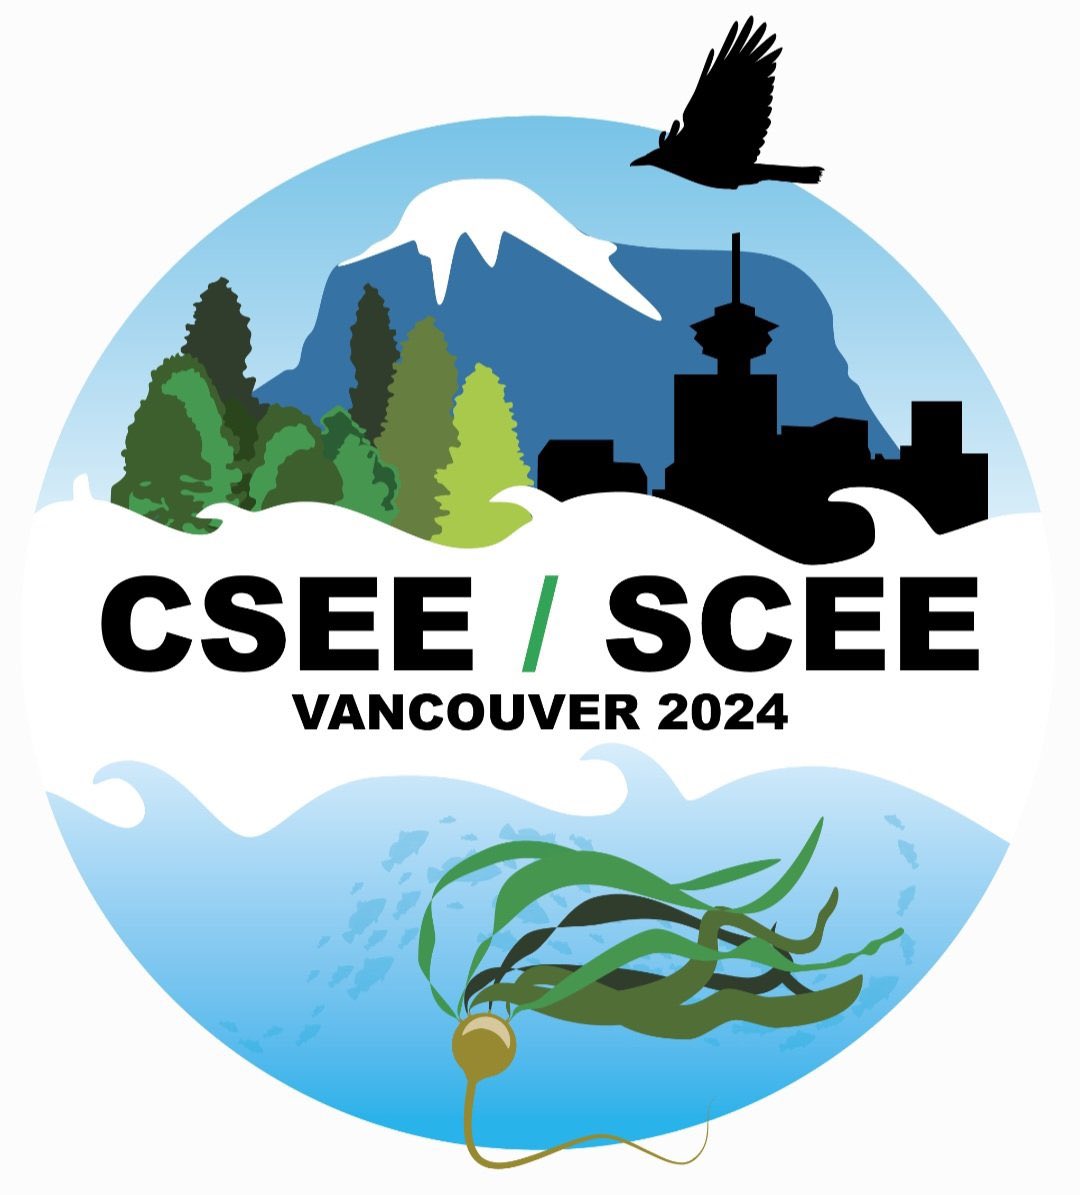 Thanks to the incredible local organizing committee of #BEEPEG2023 @CSEE_SCEEmtgs, a wonderful joint meeting of the Canadian Society for Ecology and Evolution @CSEE_SCEE and the Canadian Botanical Society. See you all next May (26-29) in Vancouver for our next meeting!